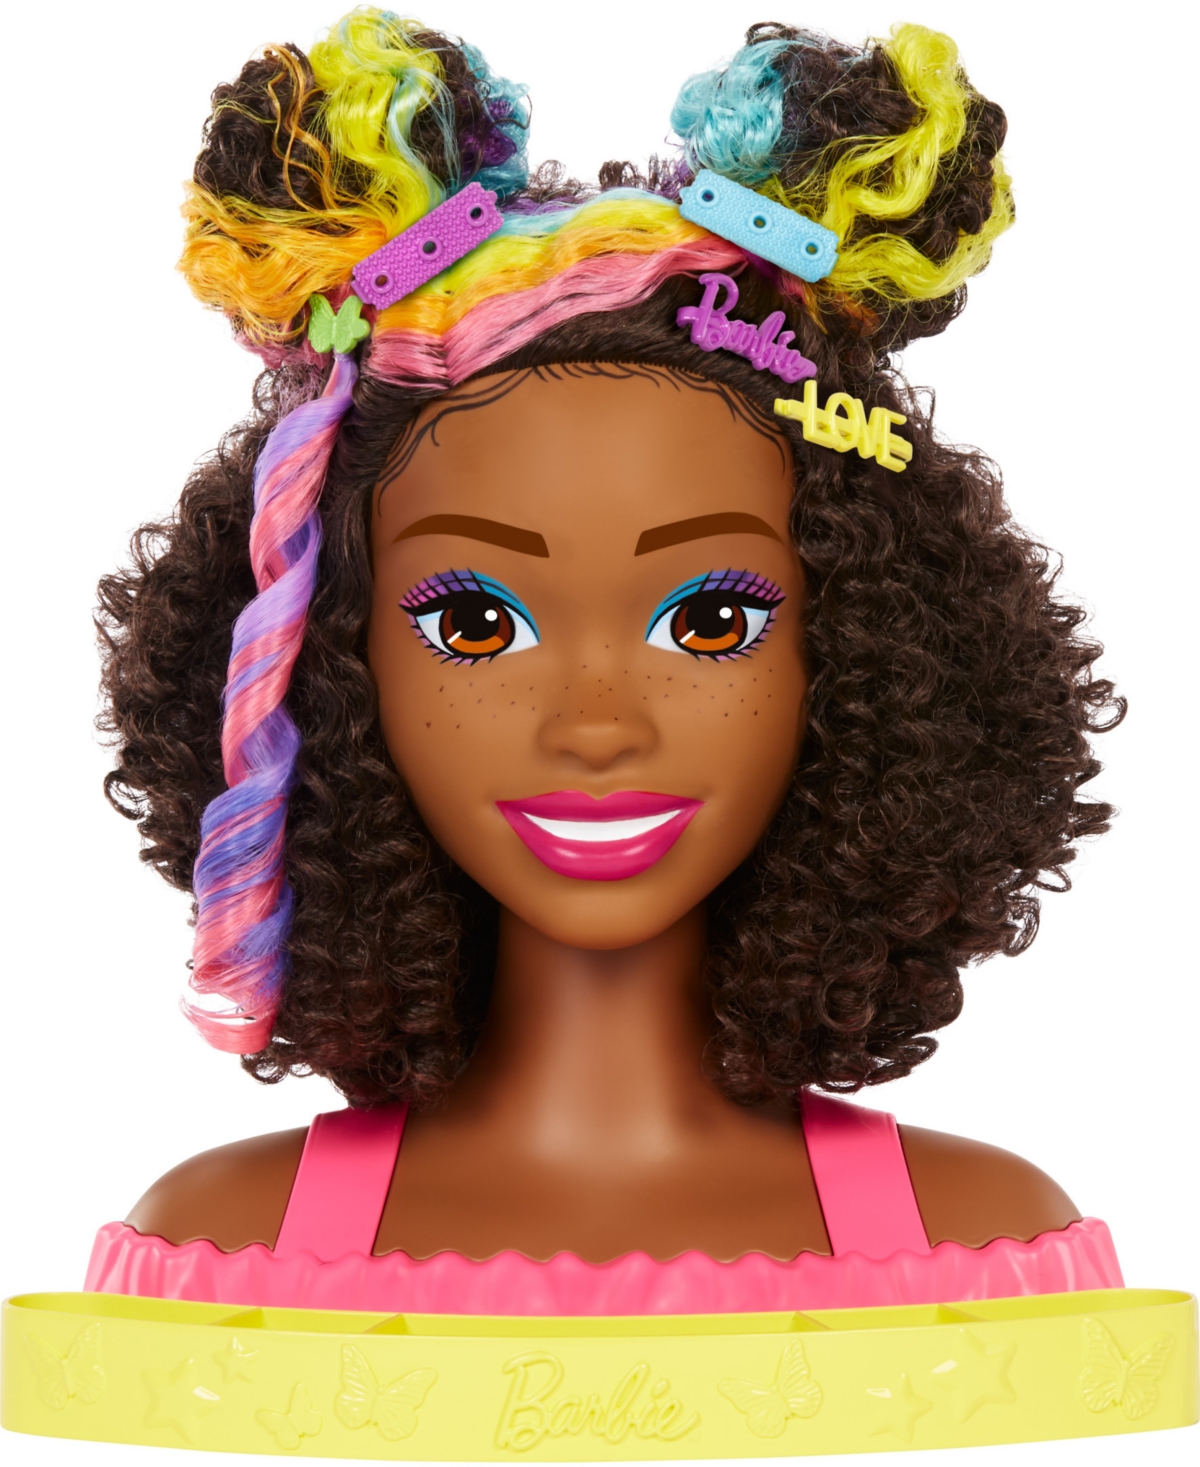 Barbie Kids' Deluxe Styling Head,  Totally Hair, Curly Brown Rainbow Hair In Multi-color